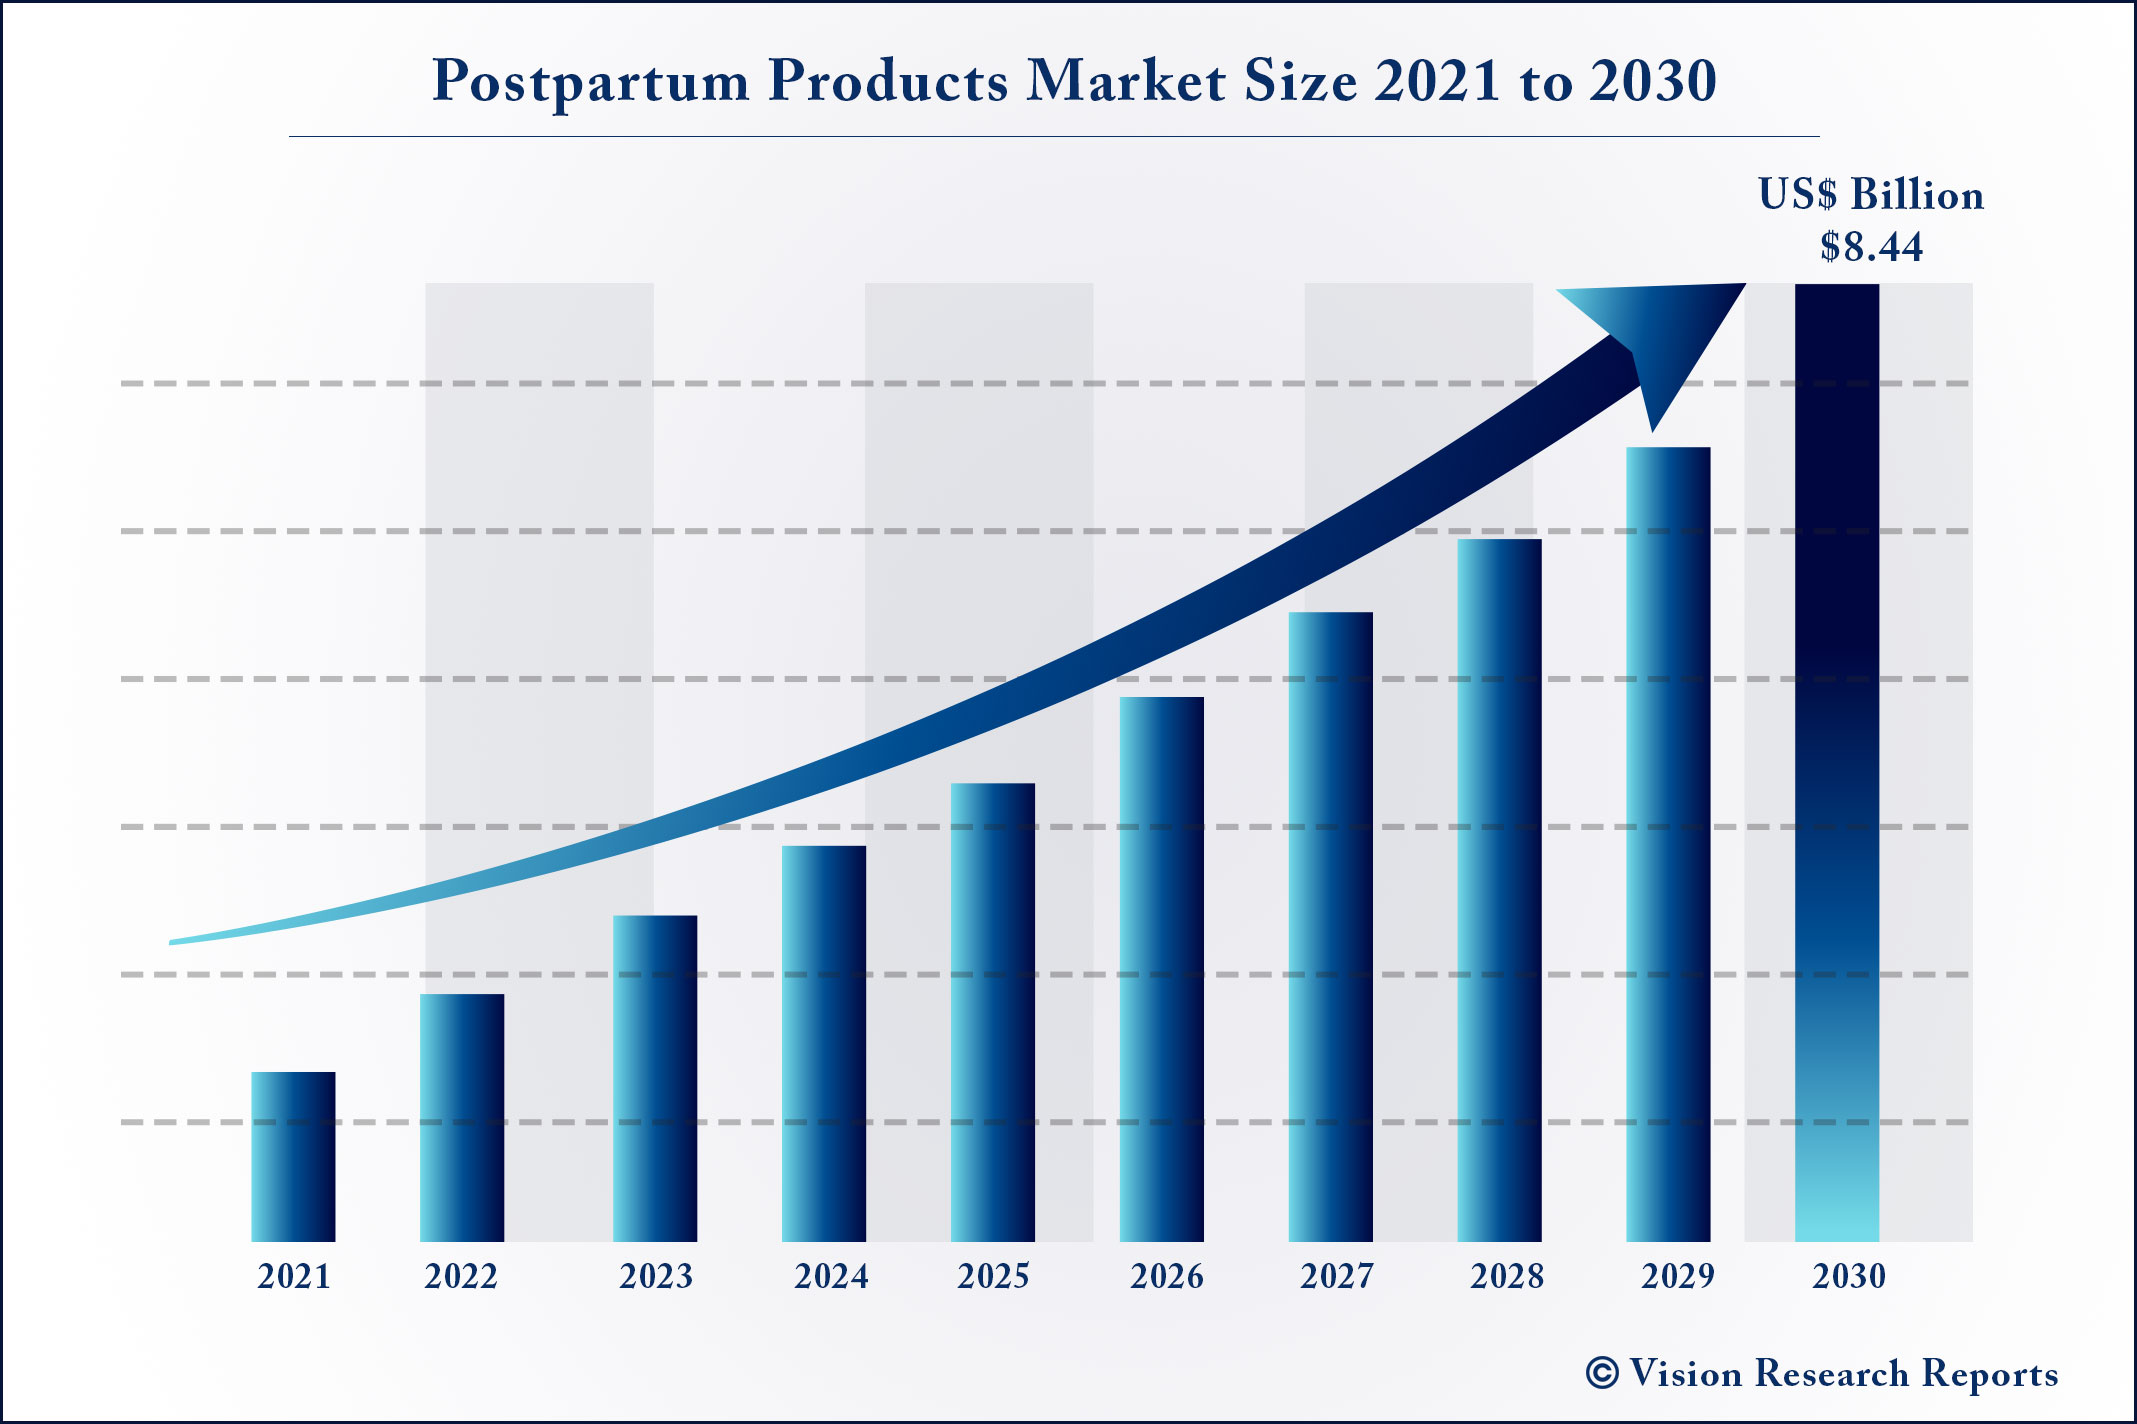 Postpartum Products Market Size 2021 to 2030